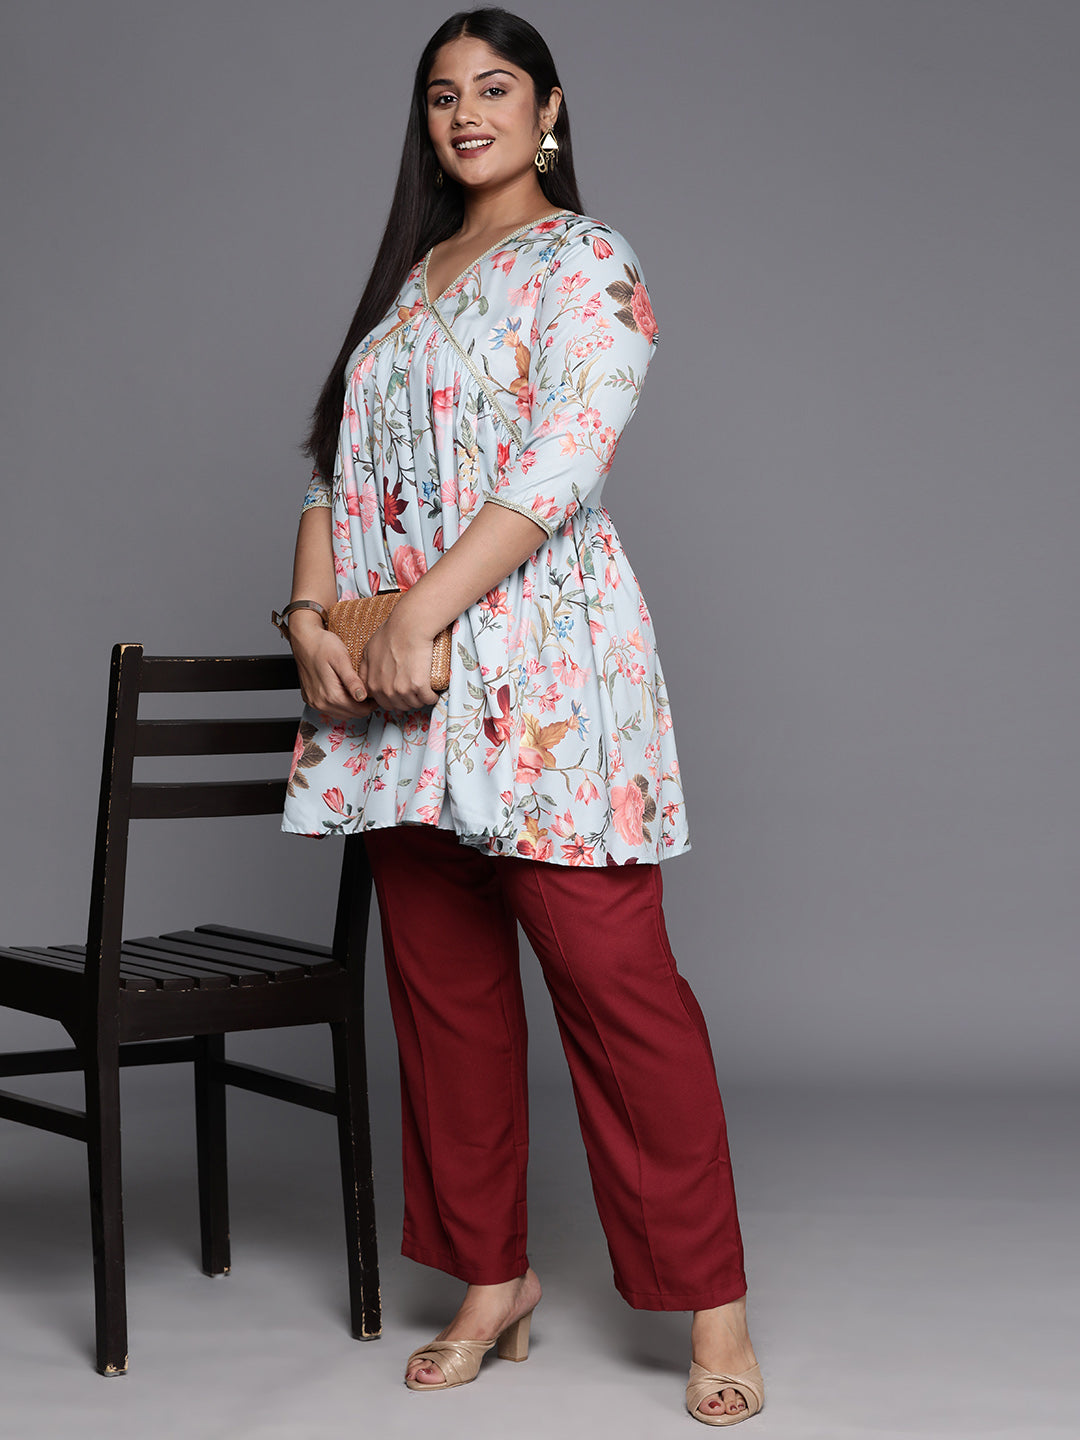 Women's Traditional Wear Tunic - A Plus By Ahalyaa